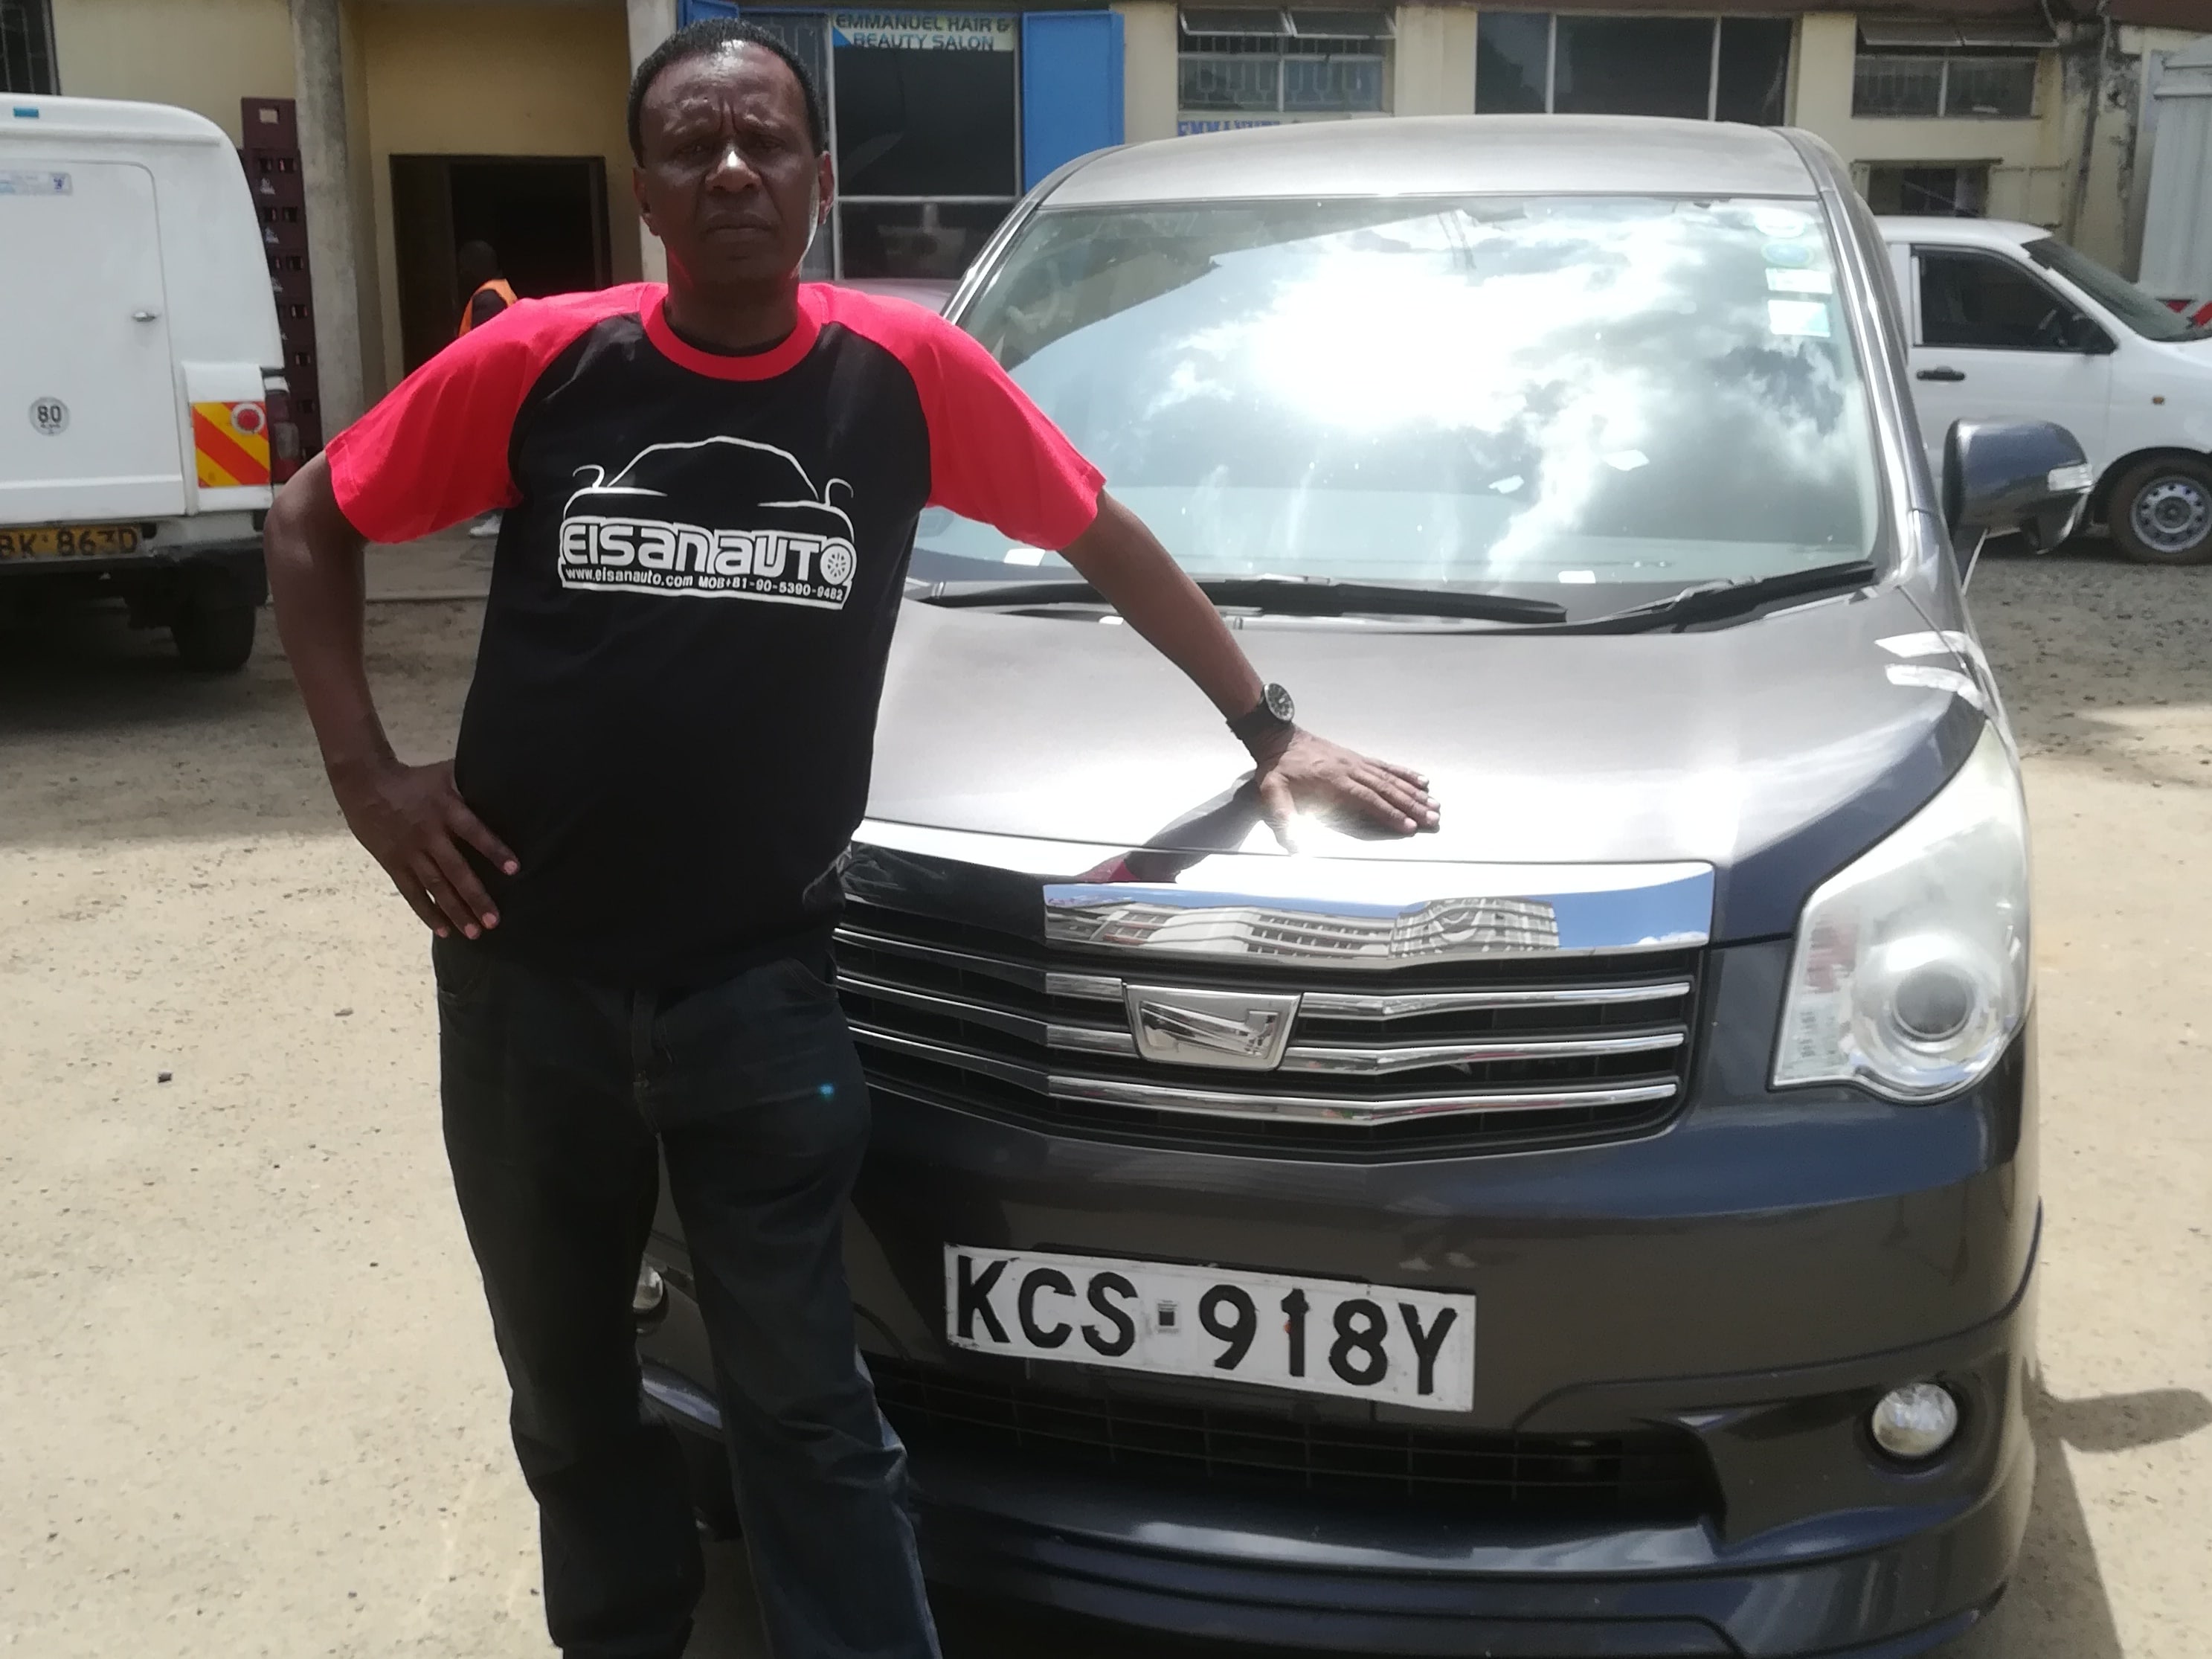 Customer who purchased a car from EISAN CO.,LTD.